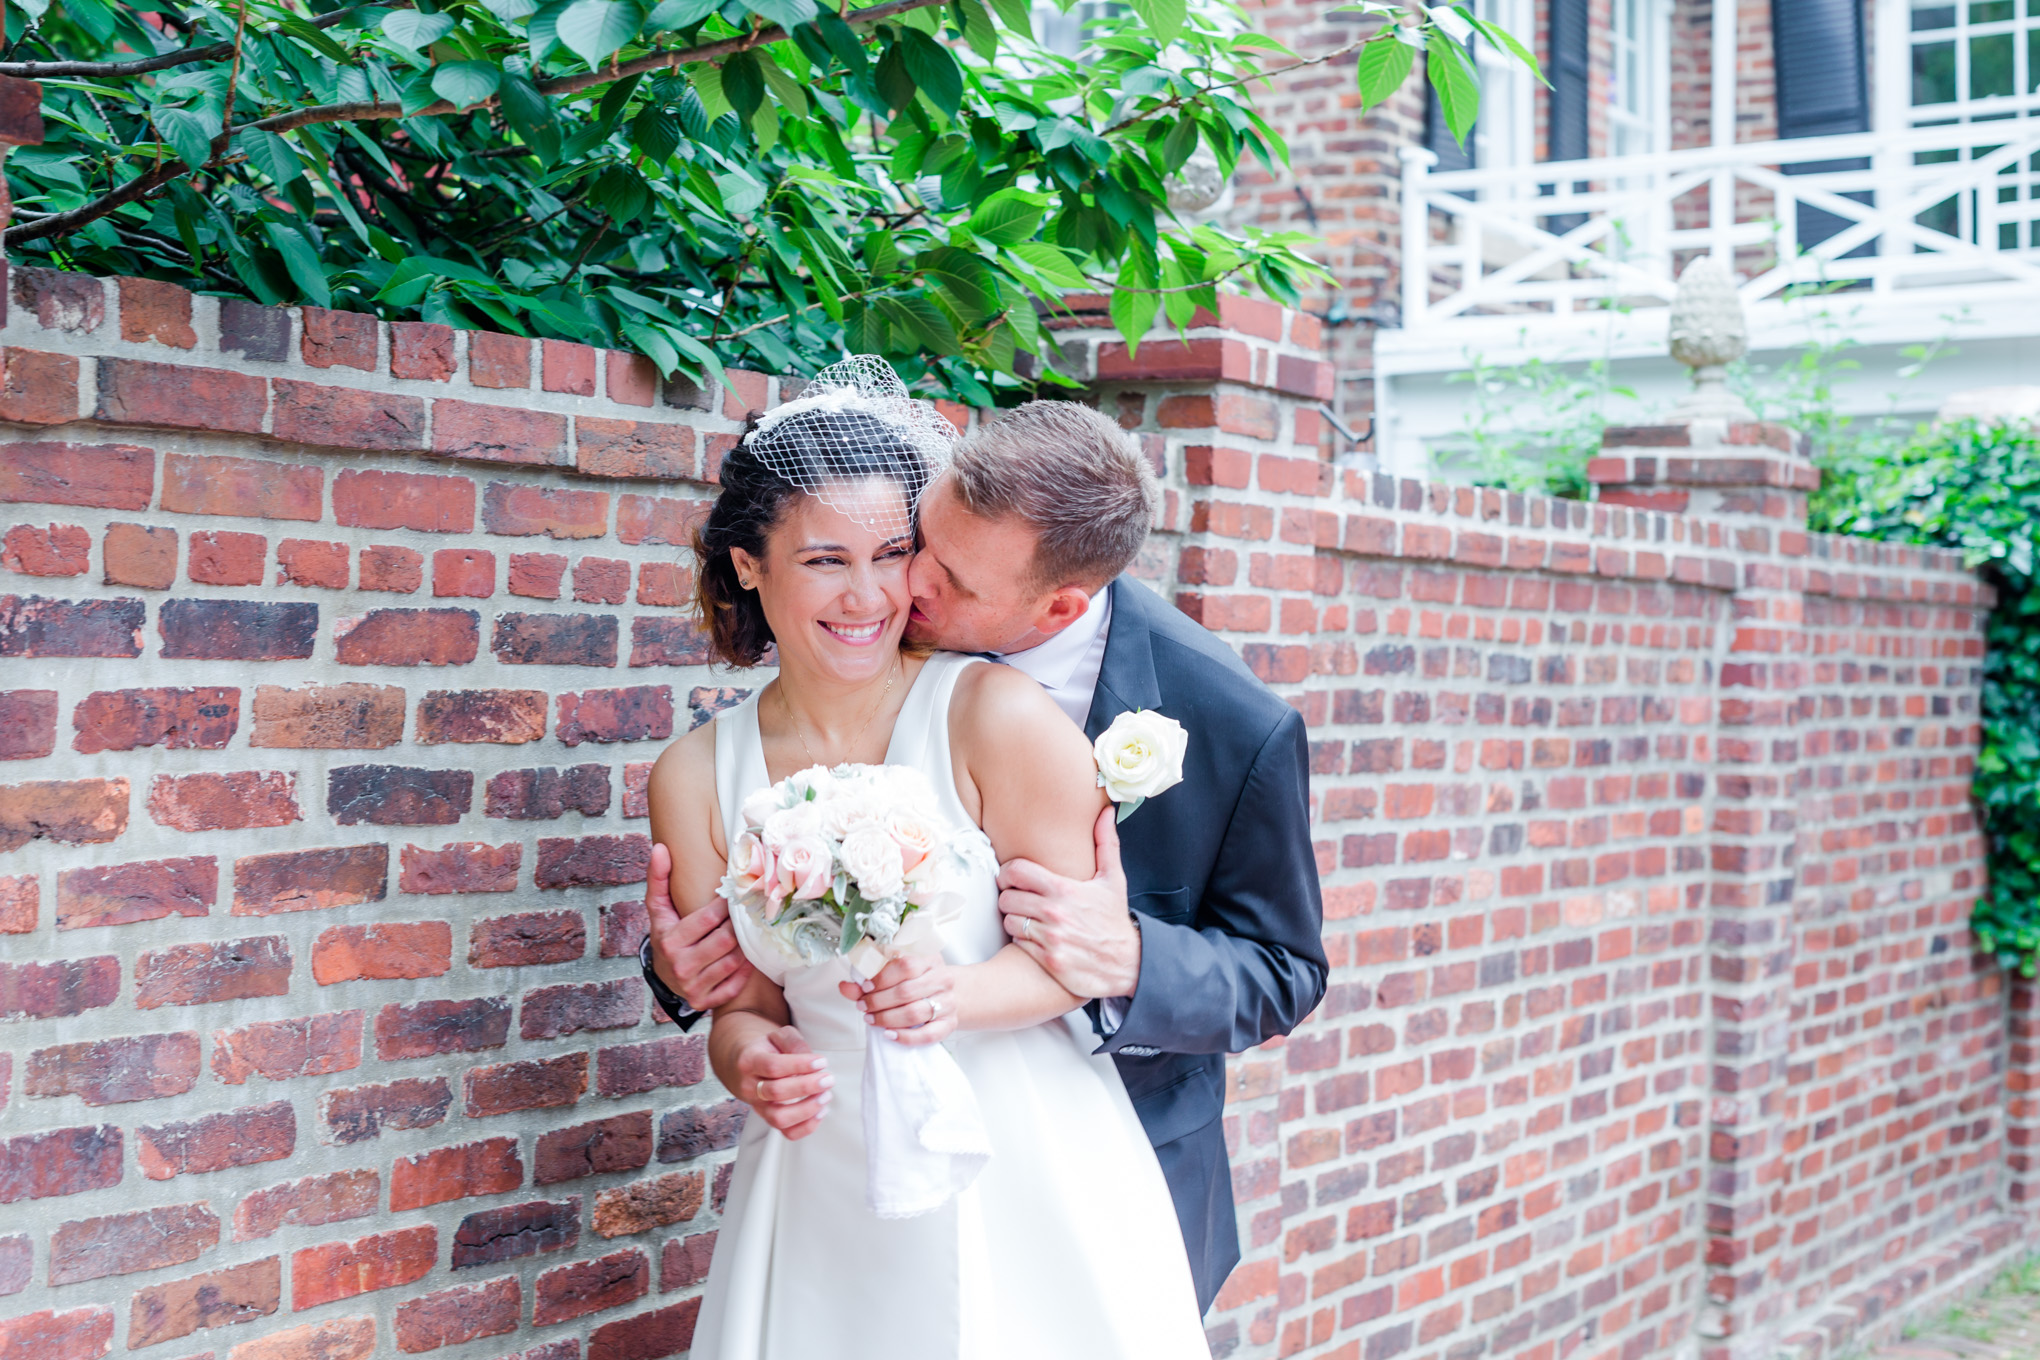 photography ready wedding venues, bride and groom, wedding portraits, portrait locations, old town Alexandria, northern VA wedding venues, Morrison House, Morrison House wedding, kissing pic, a-line wedding gown, surprise kiss, brick wall